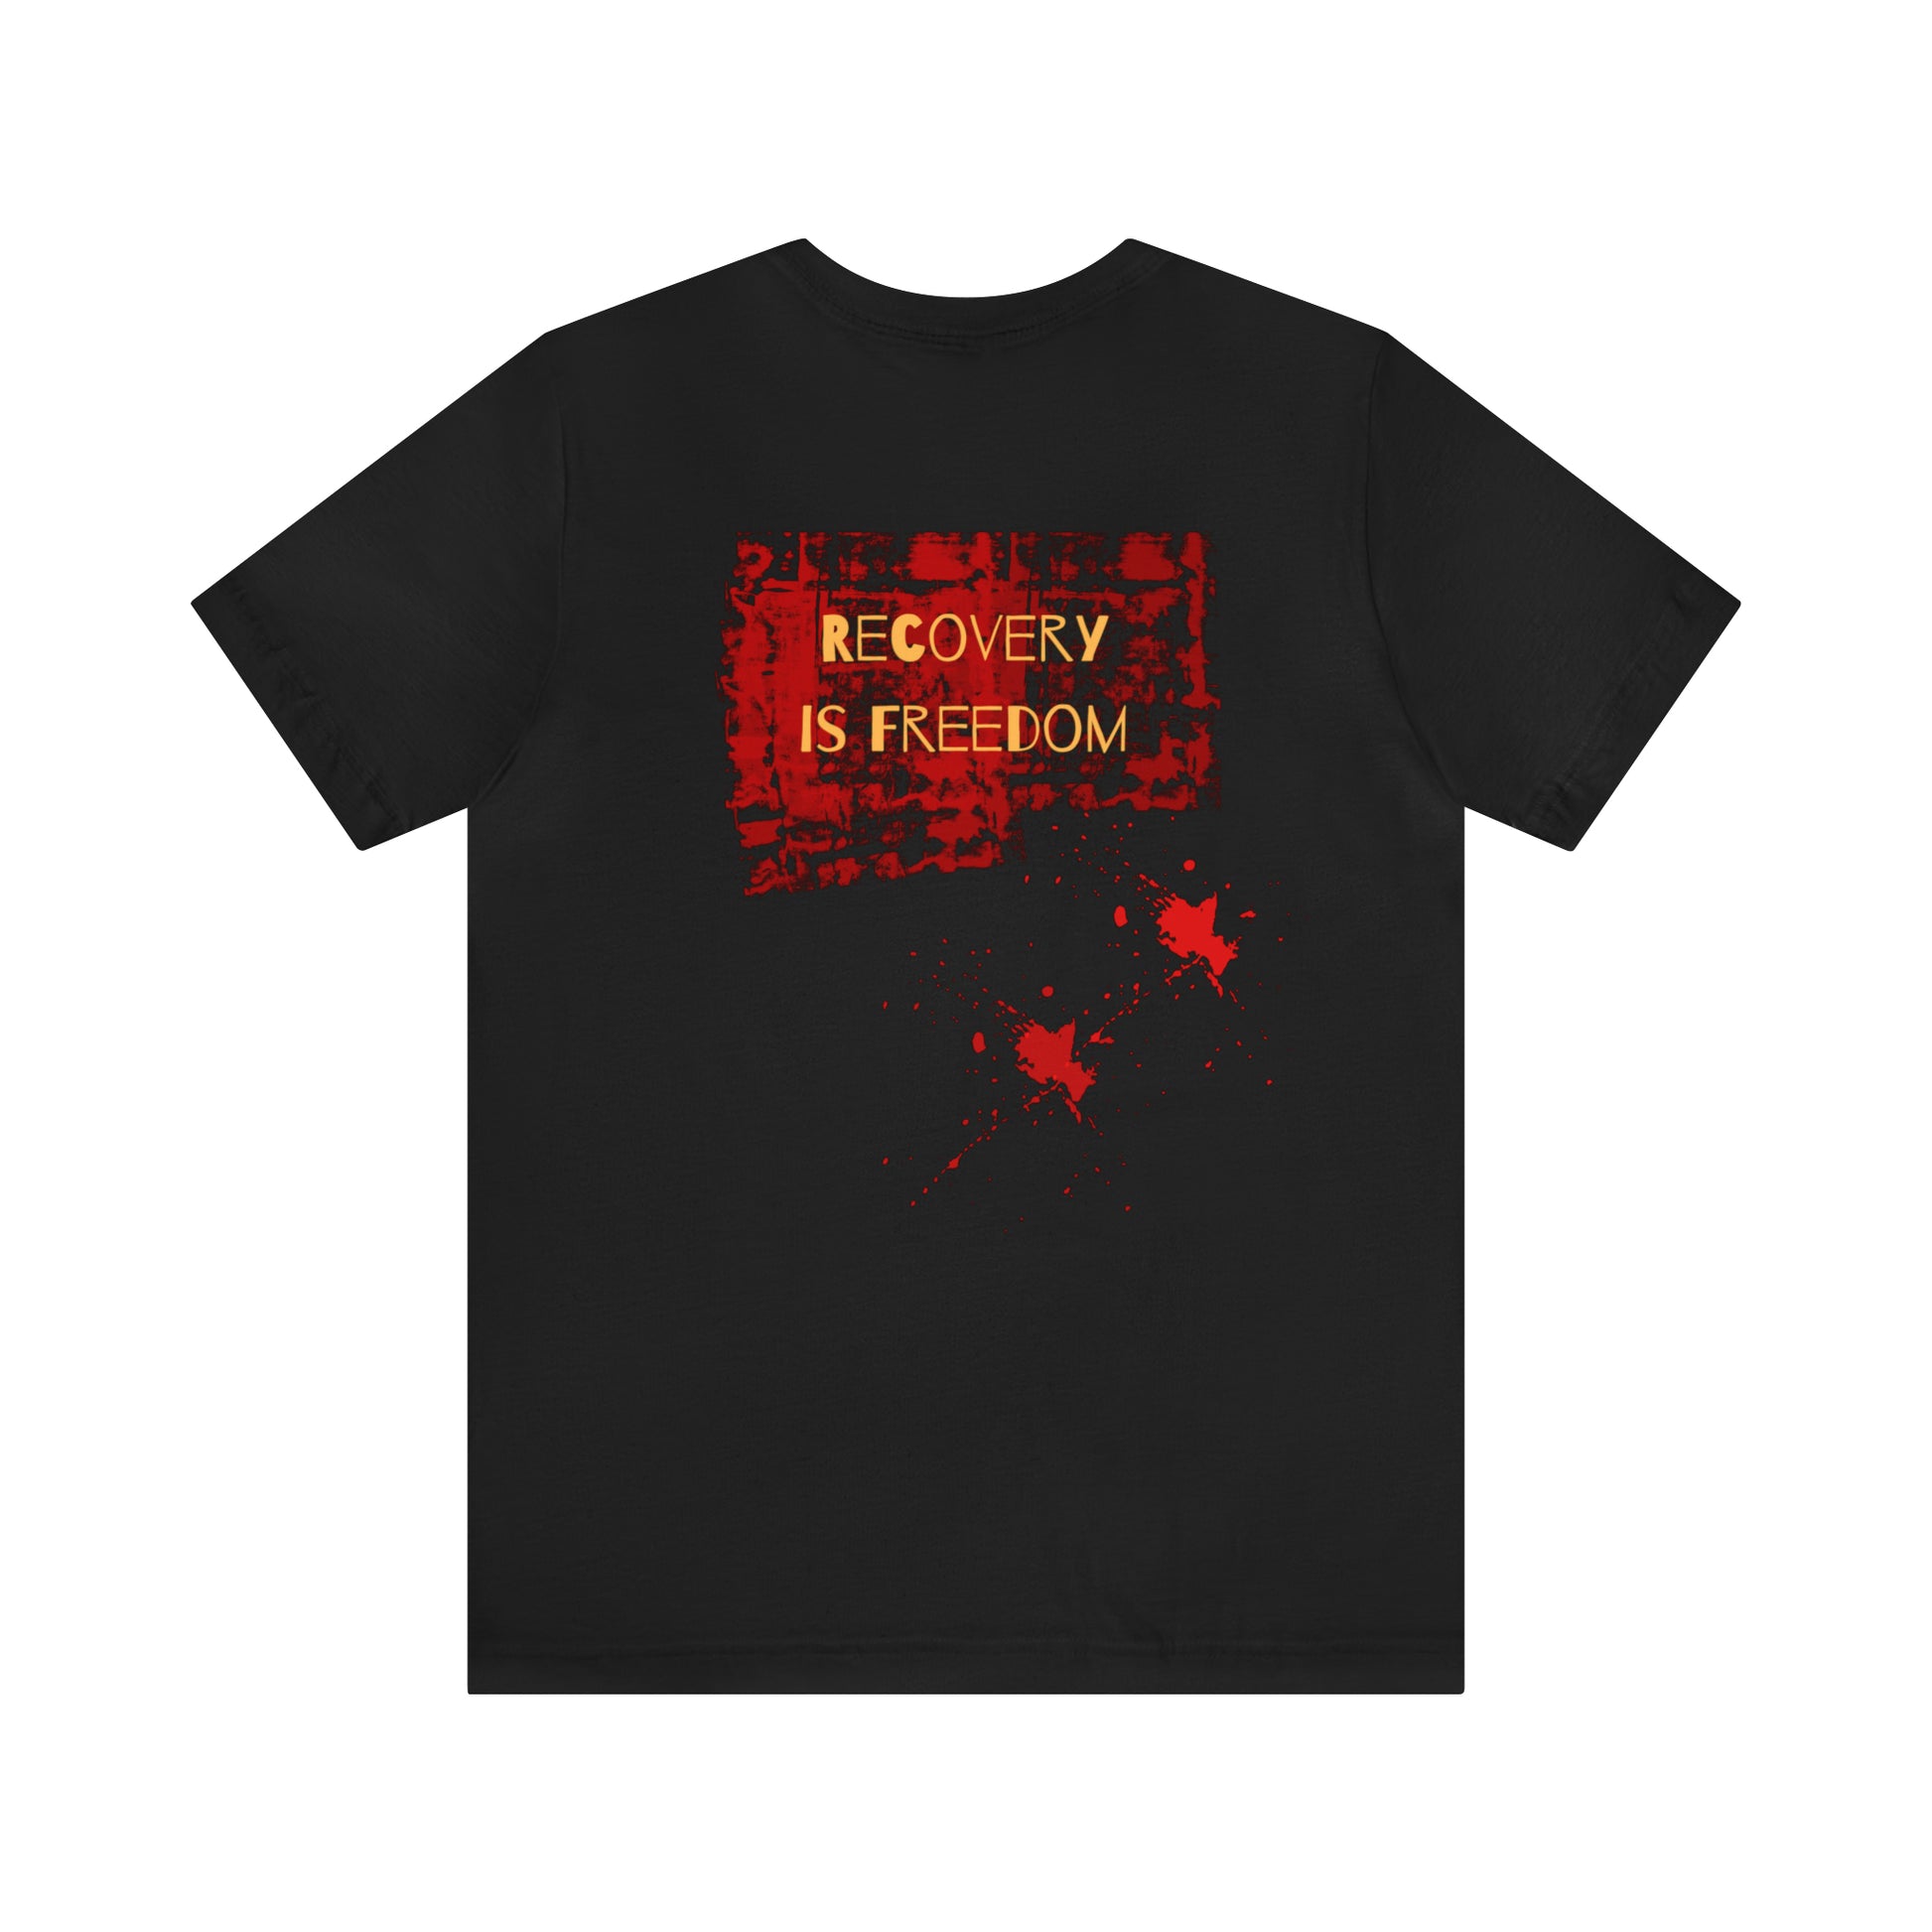 Sober tee from Celebrate Sobriety Gifts.com